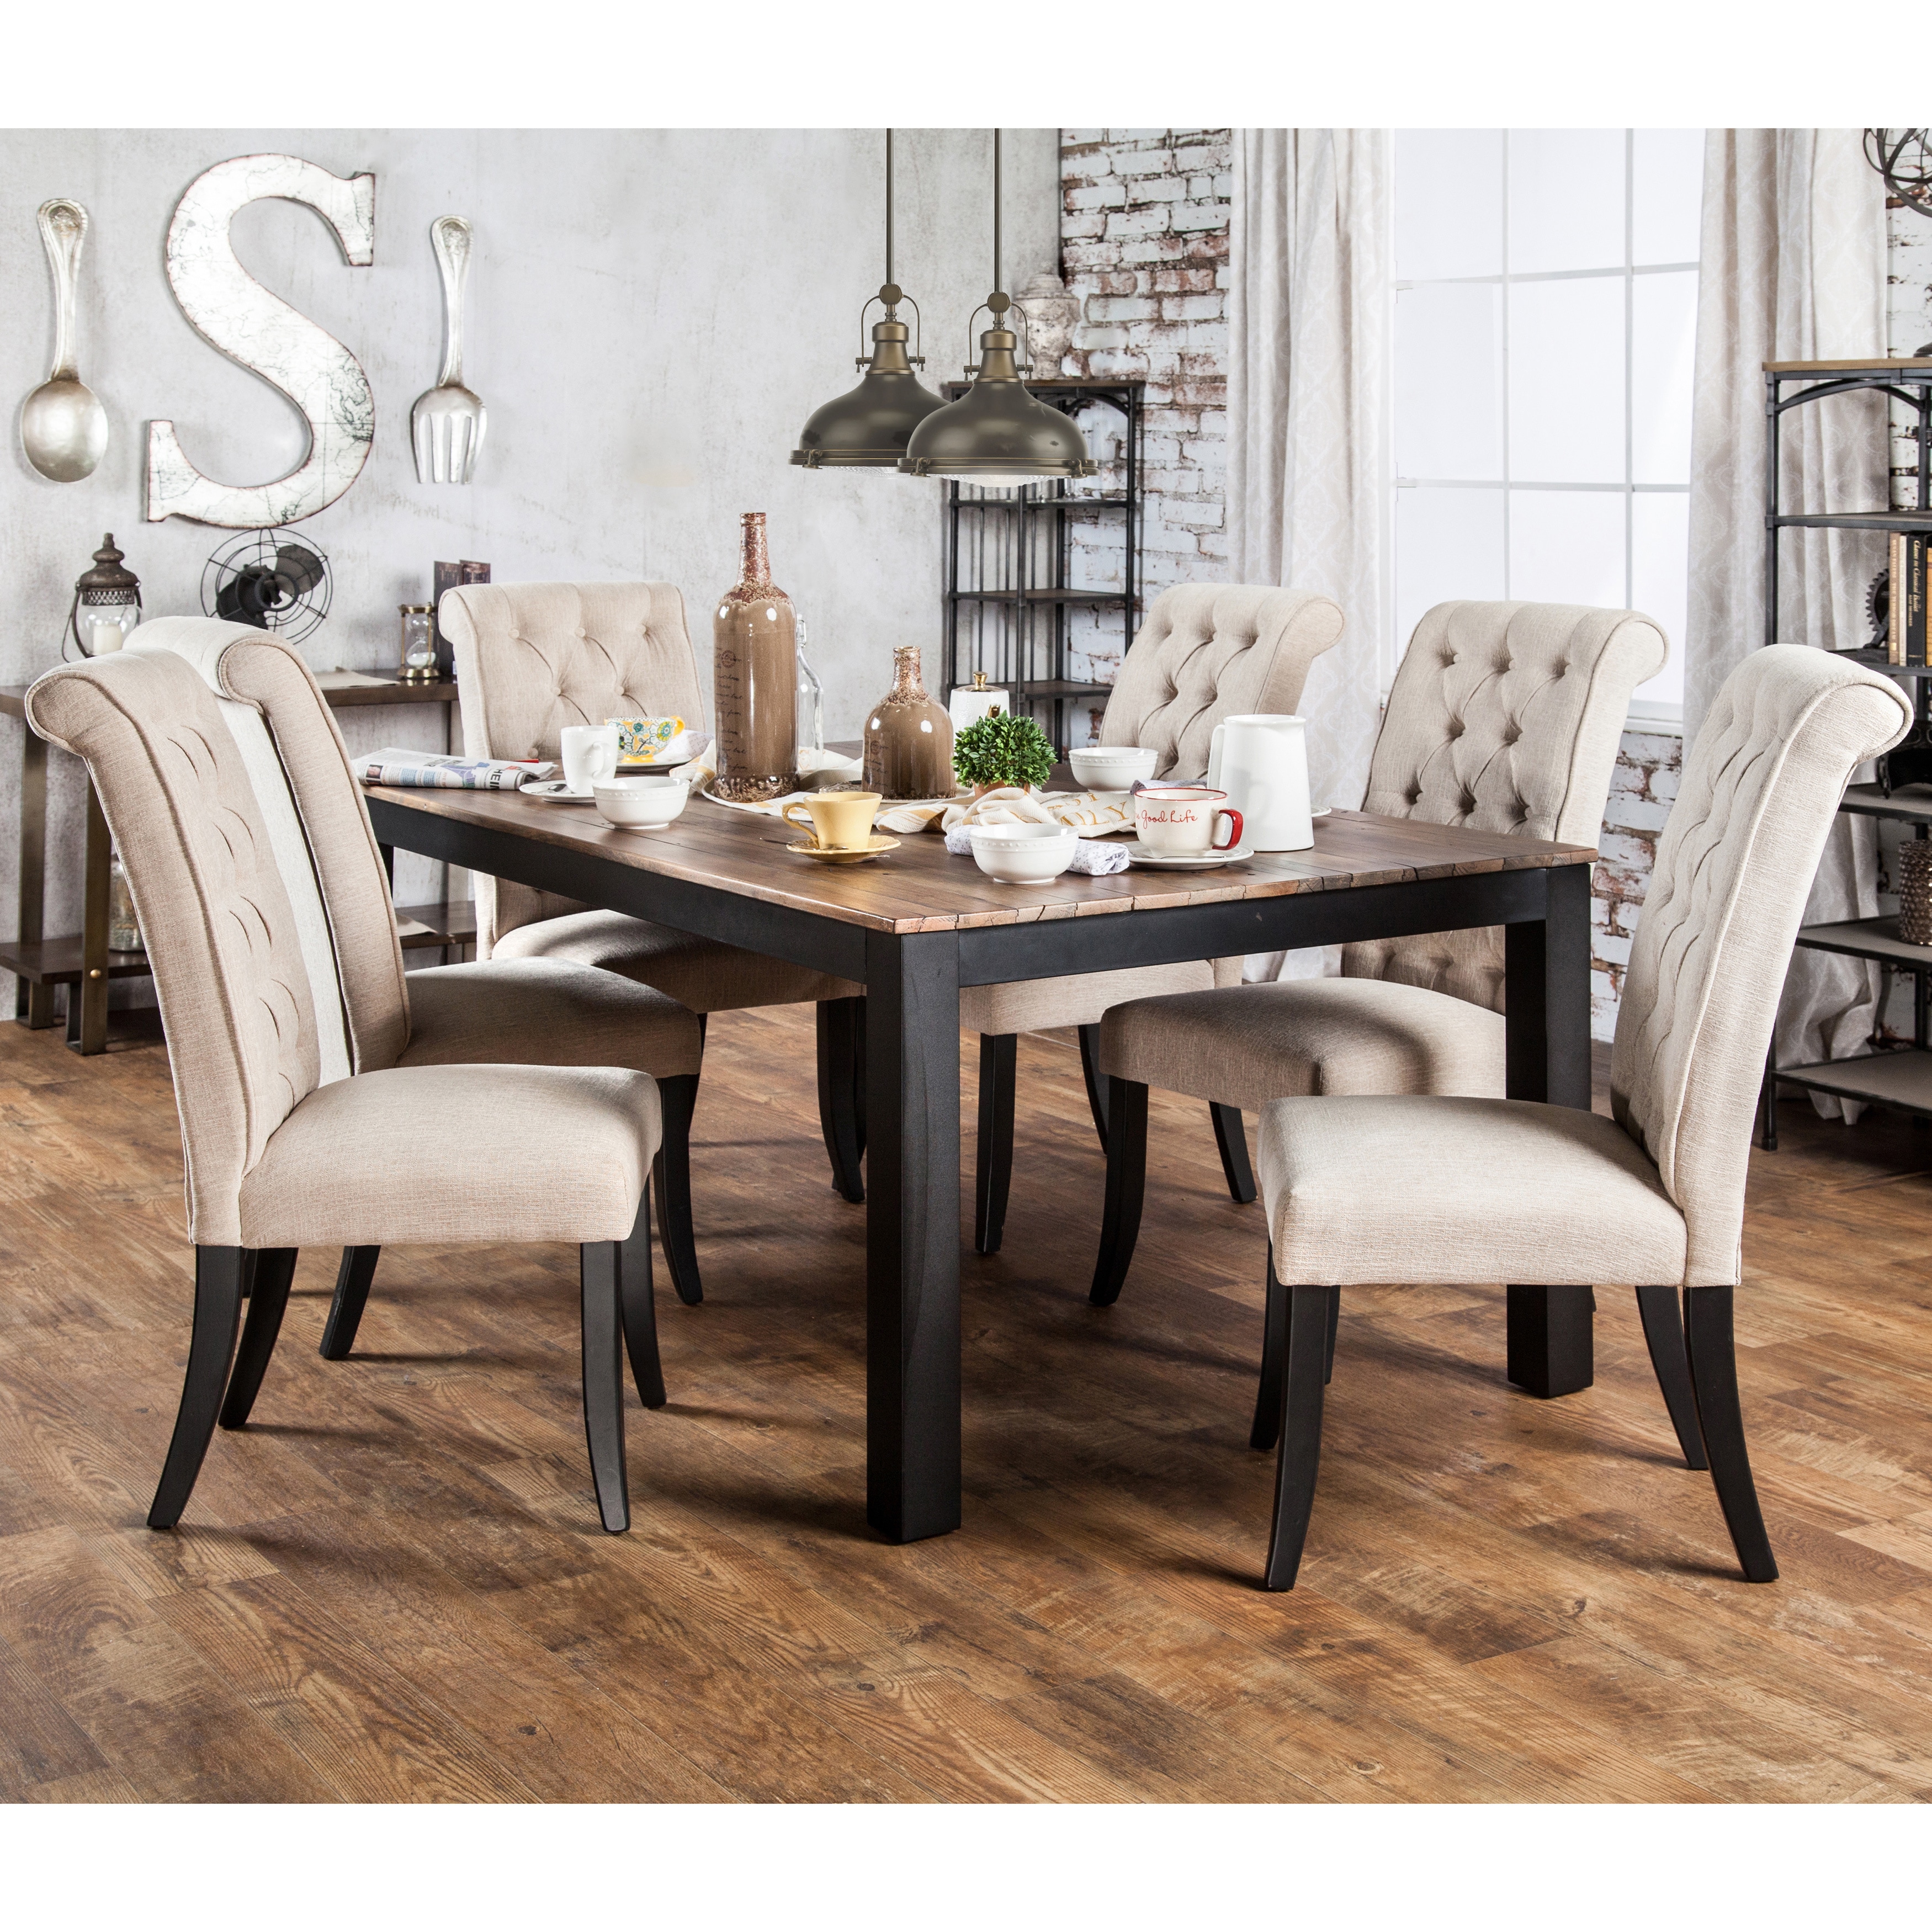  Rustic Dining Table Set 